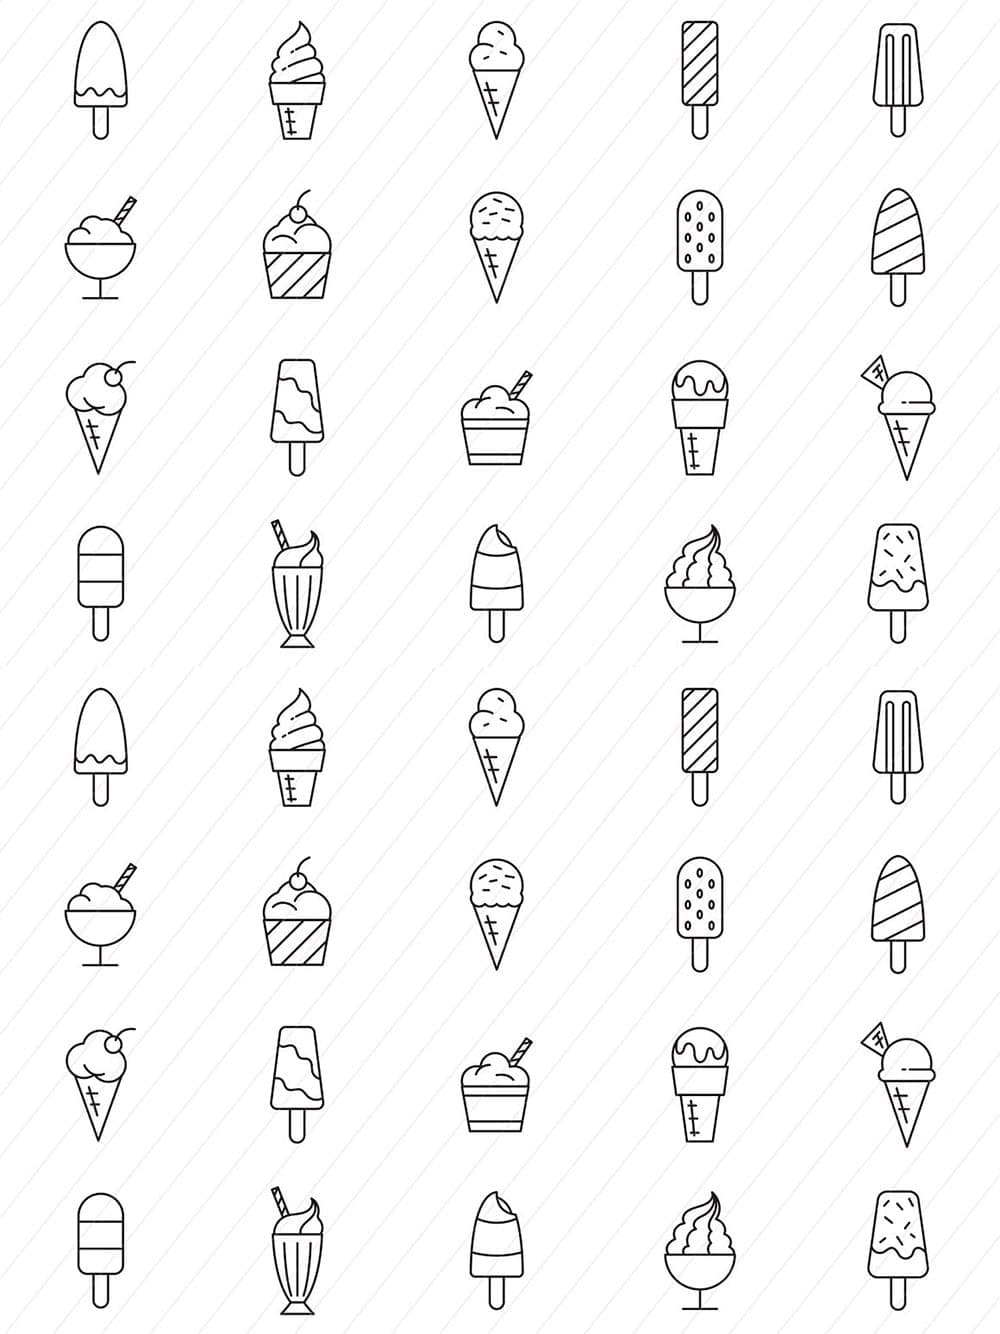 Ice cream icons, picture for pinterest.